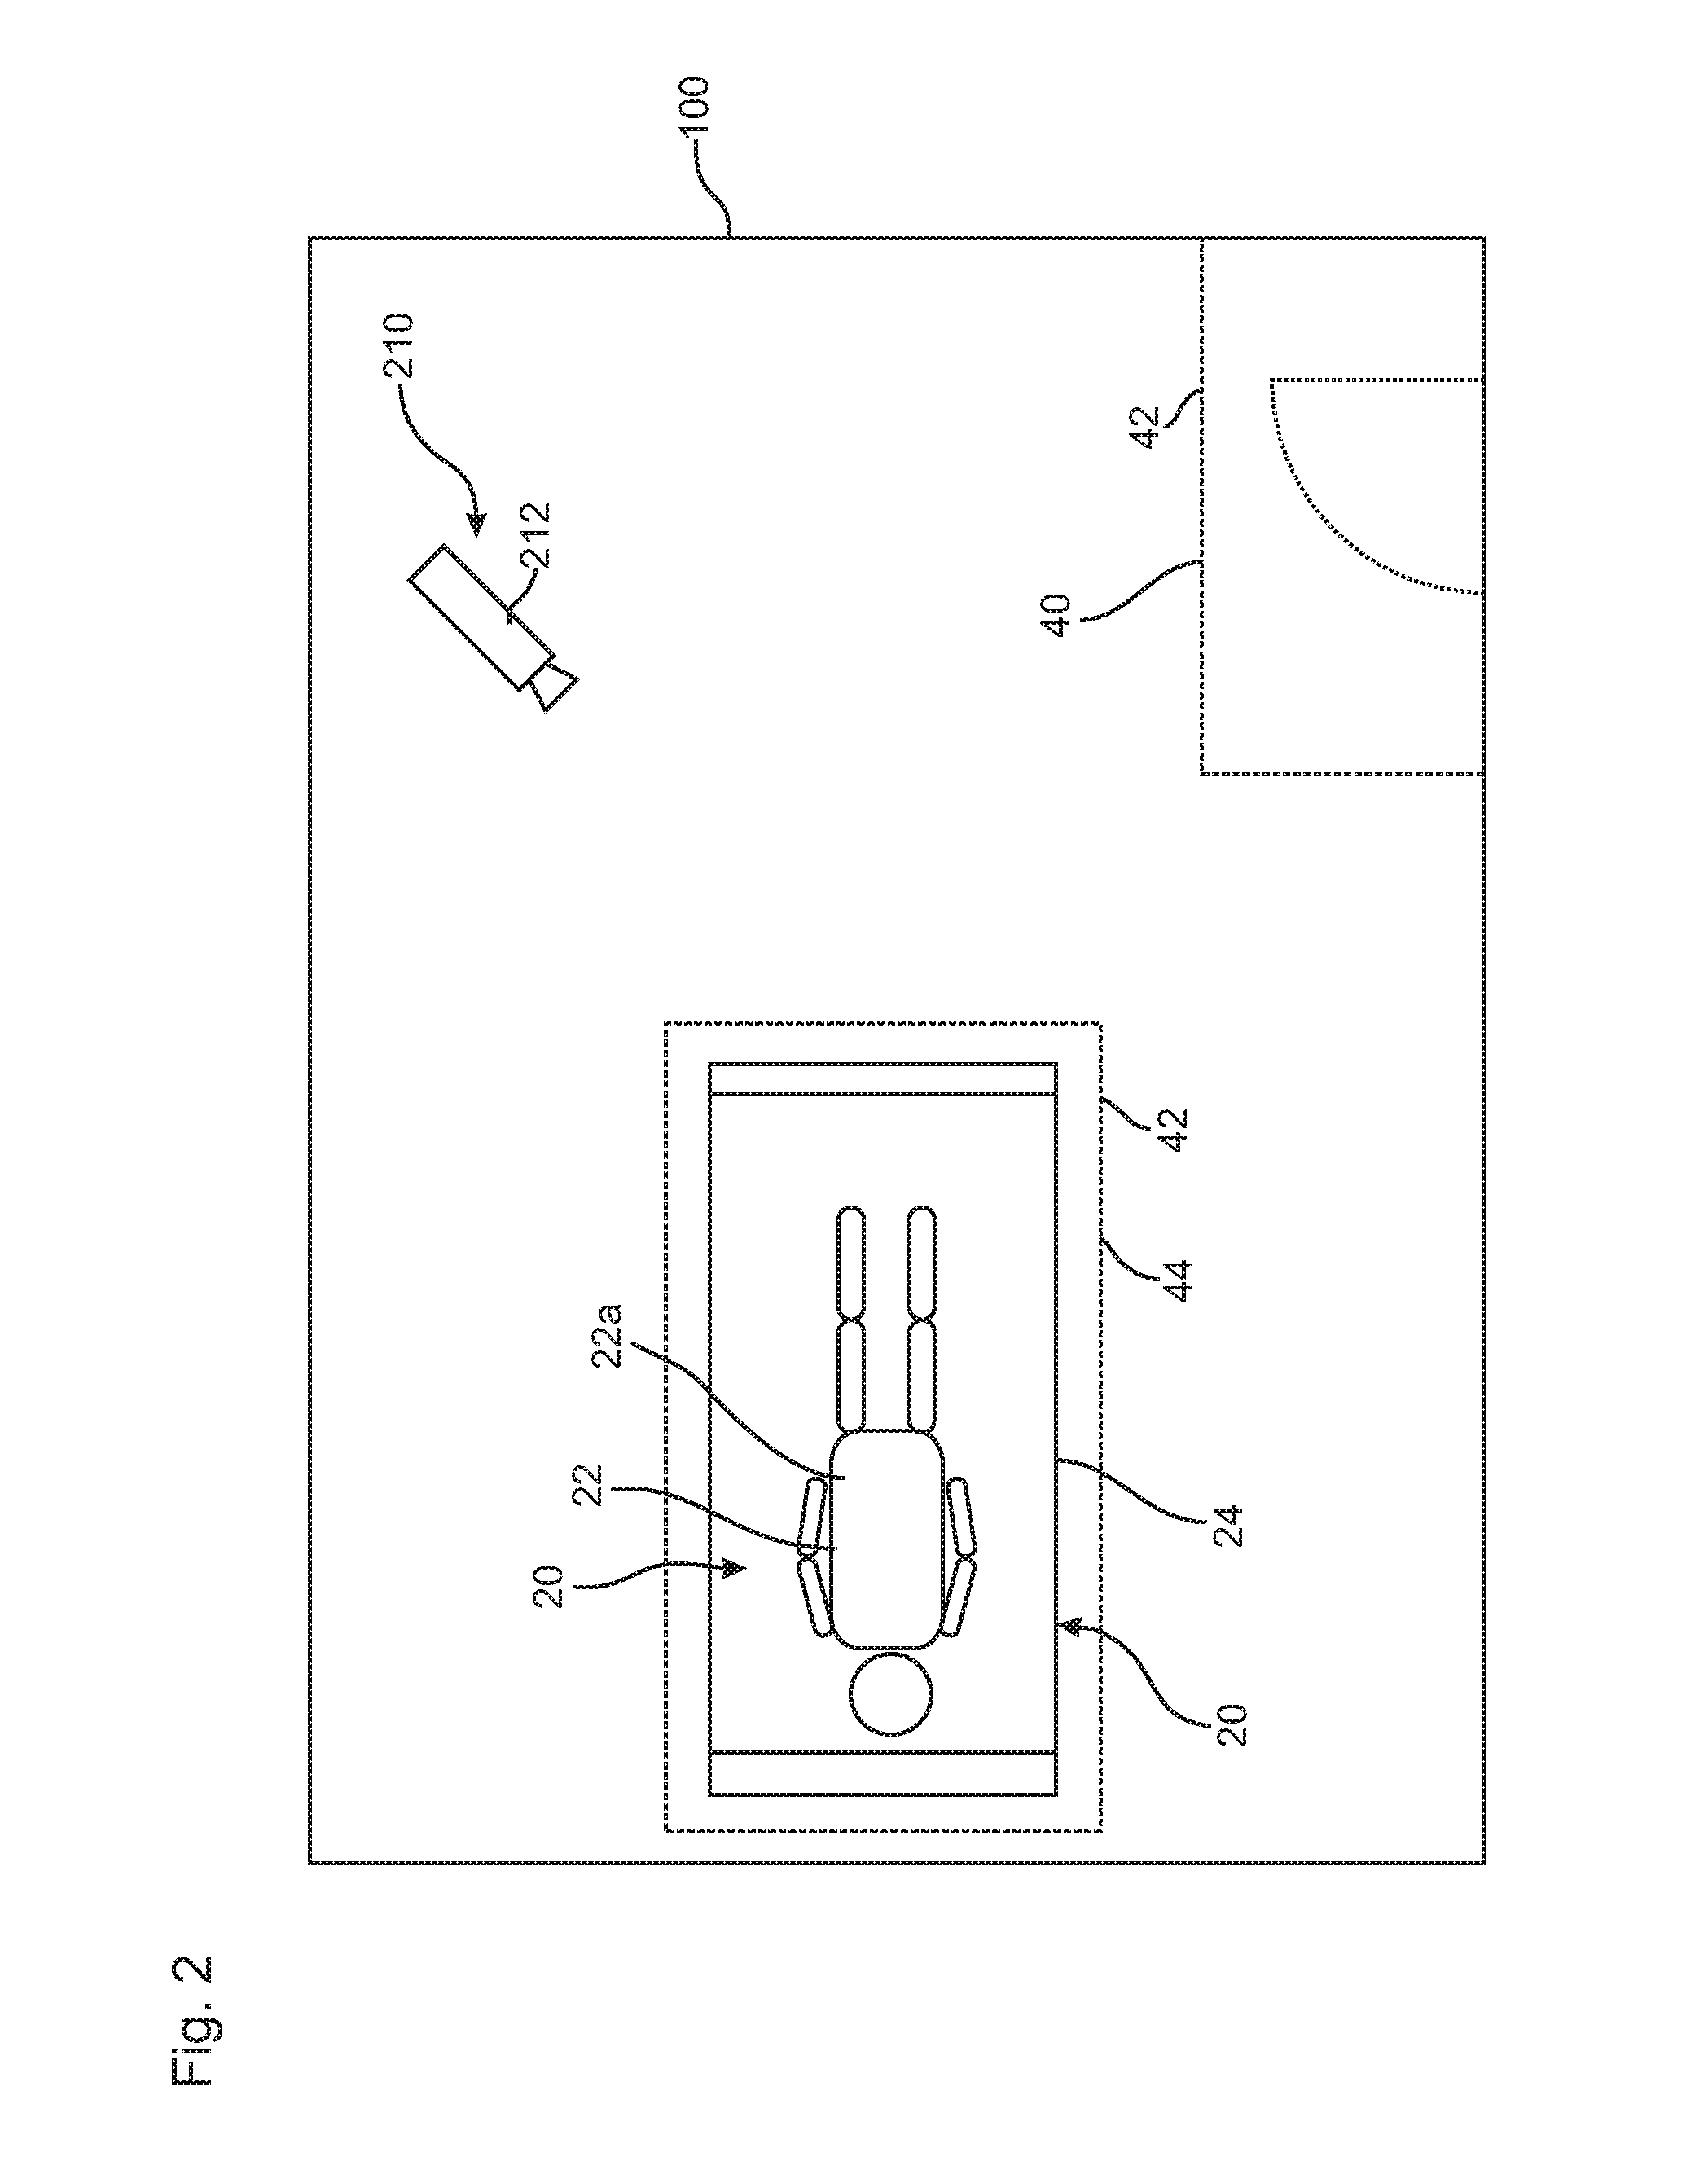 Method for monitoring a patient within a medical monitoring area